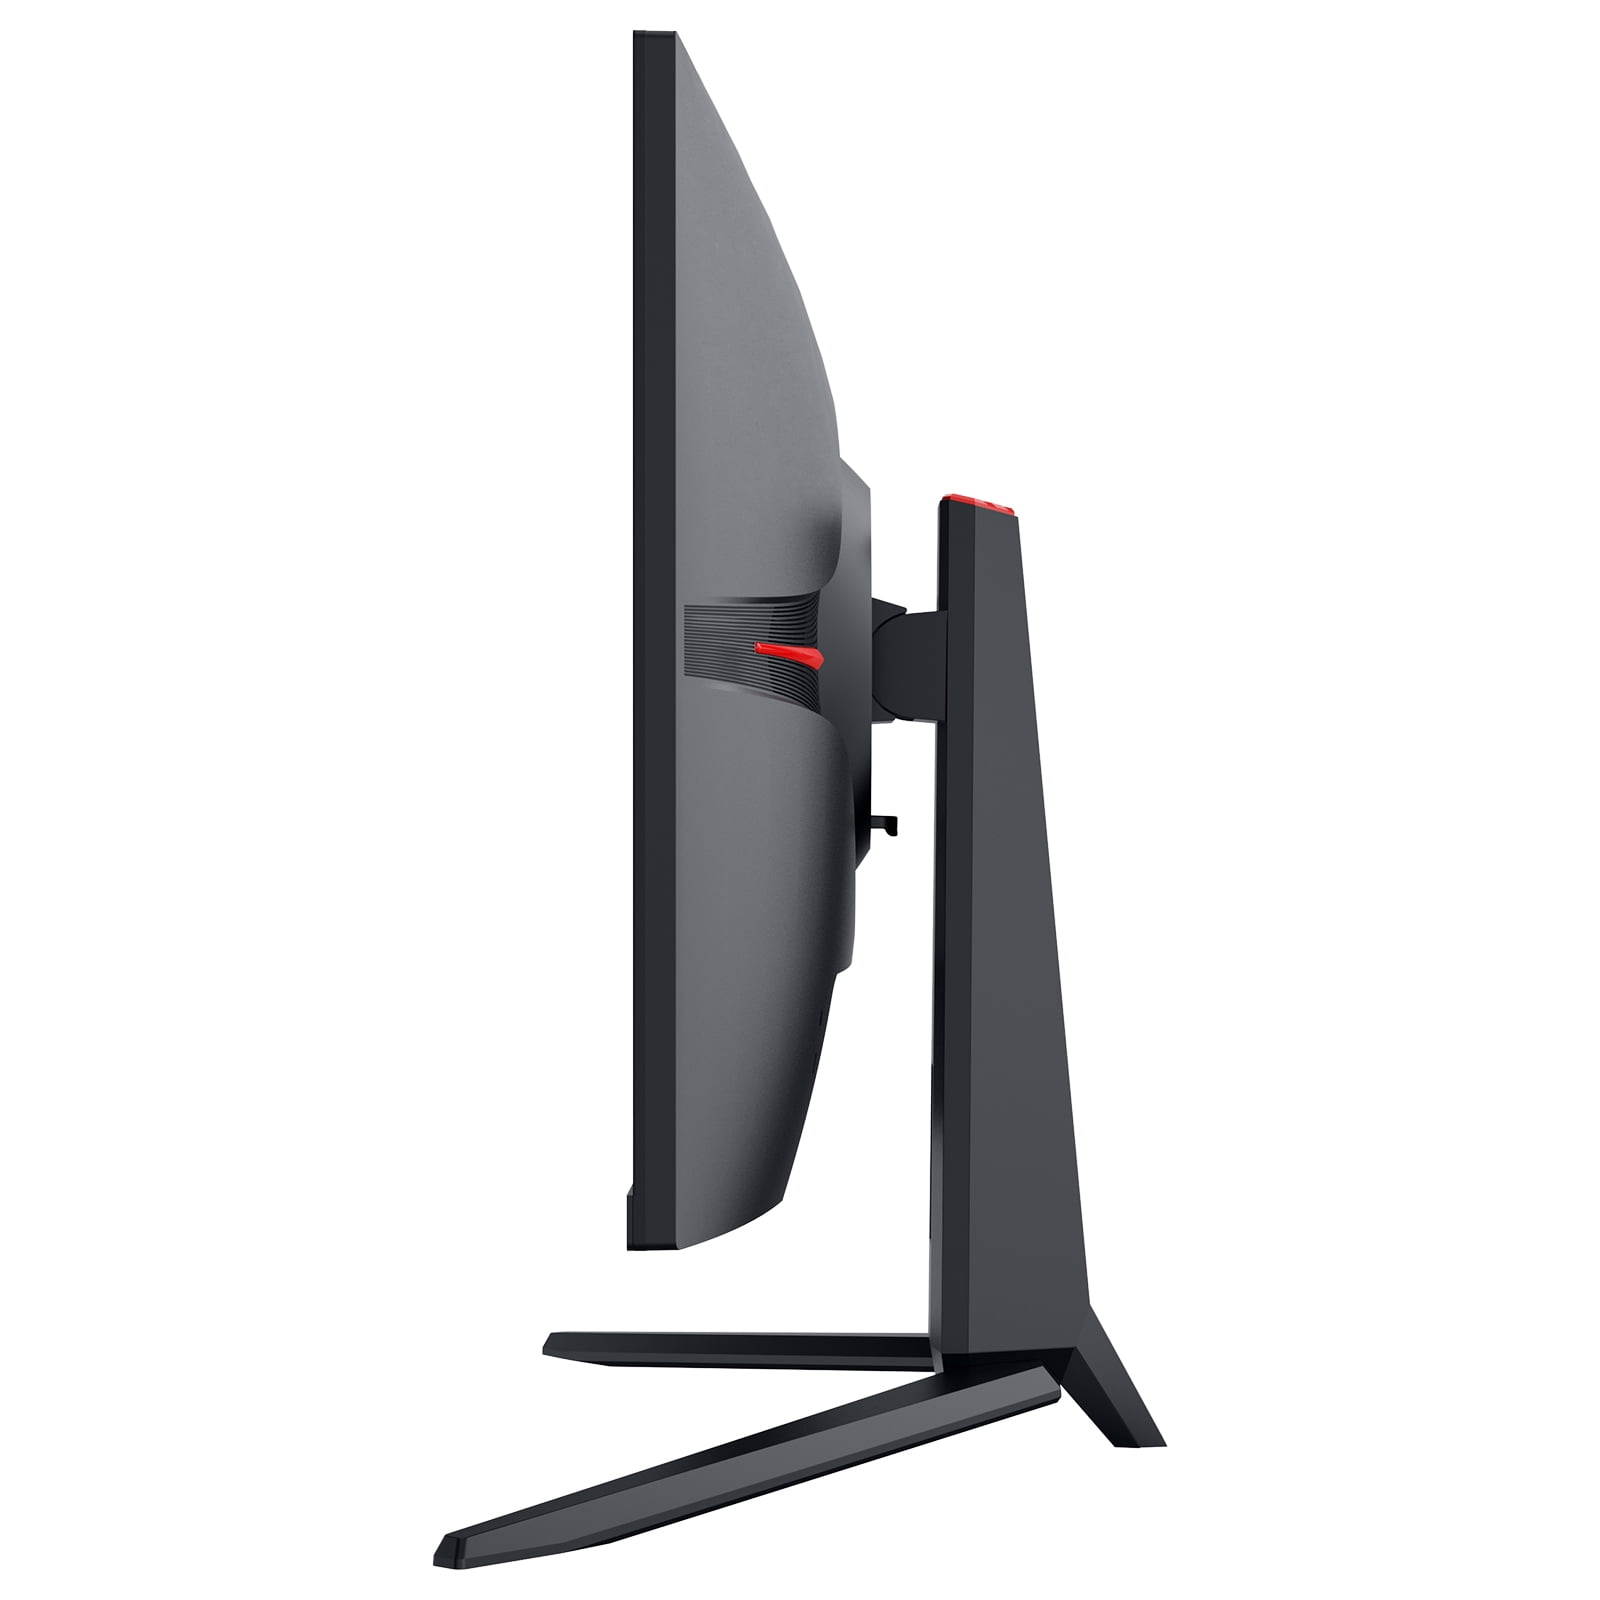 KOORUI 24 Gaming Gaming Monitor 144hz 165Hz/144Hz, 1080p, 1ms Response  Time, IPS Display, FreeSync & G Sync Compatible For PC From Galaxytoys,  $1,547.33